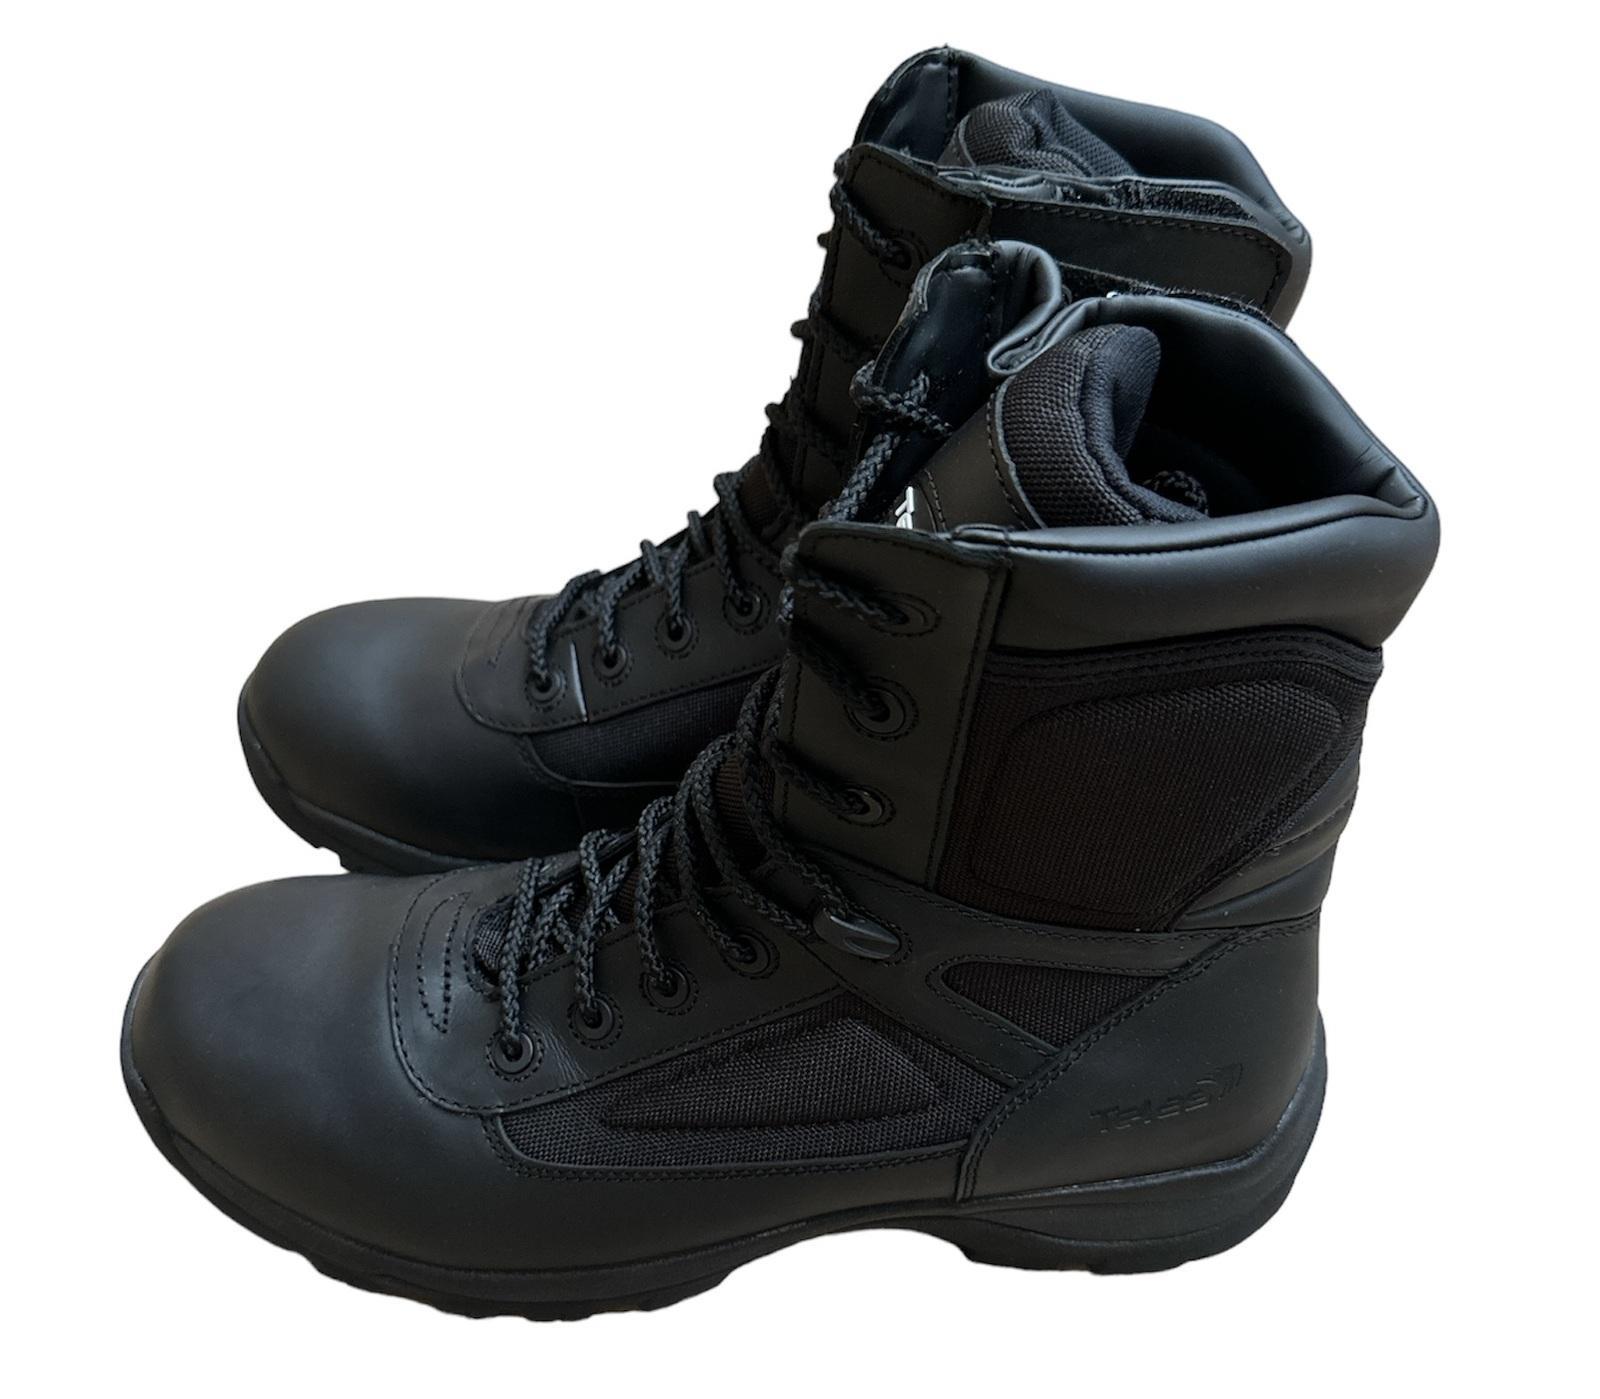 Telas Leather Combat w Side Zip Boots EEE Tactical Police Military Cadet - Black - US 4